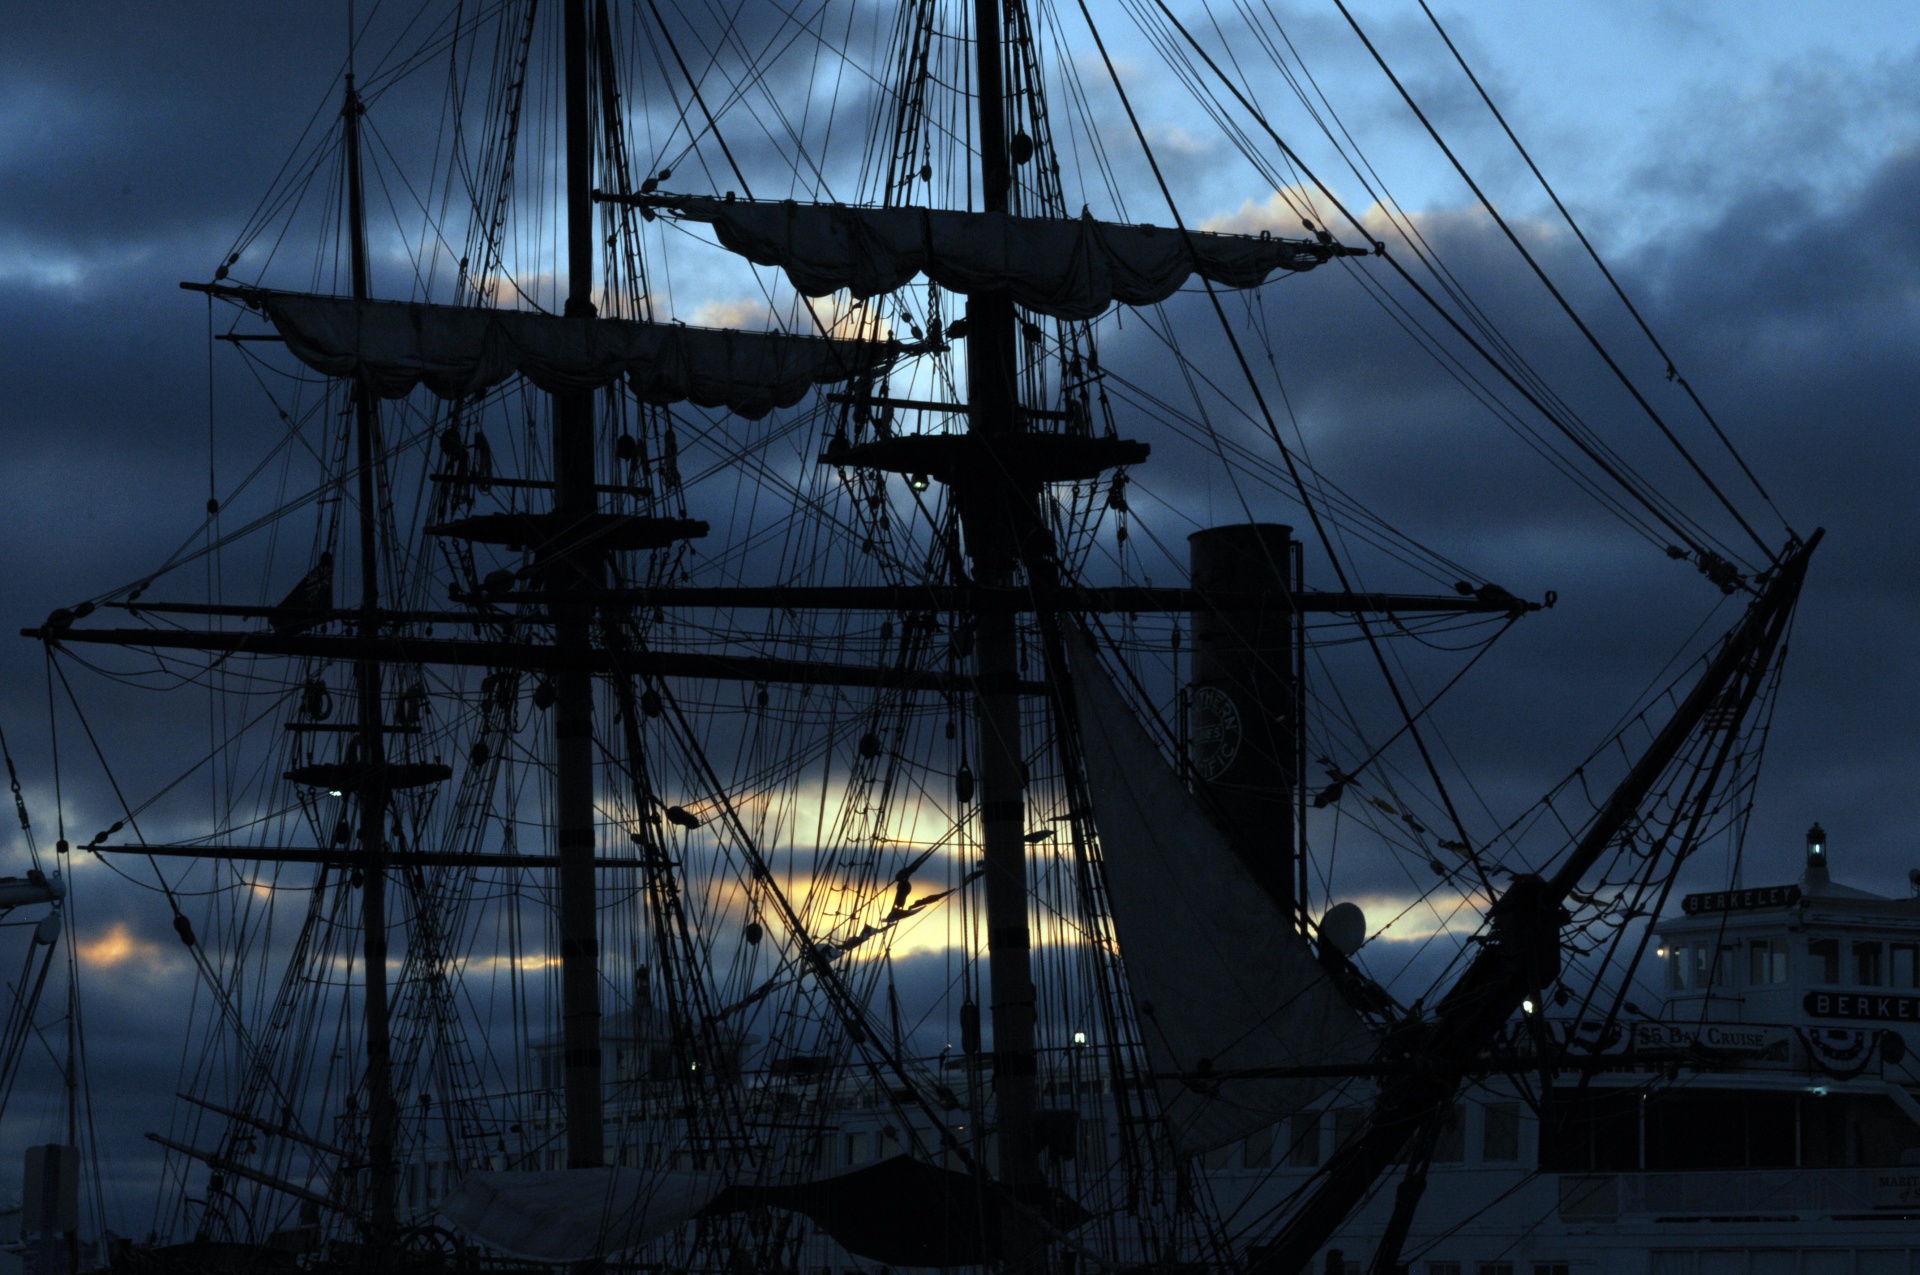 docked 1800 sailing ship silhouetted in setting sun